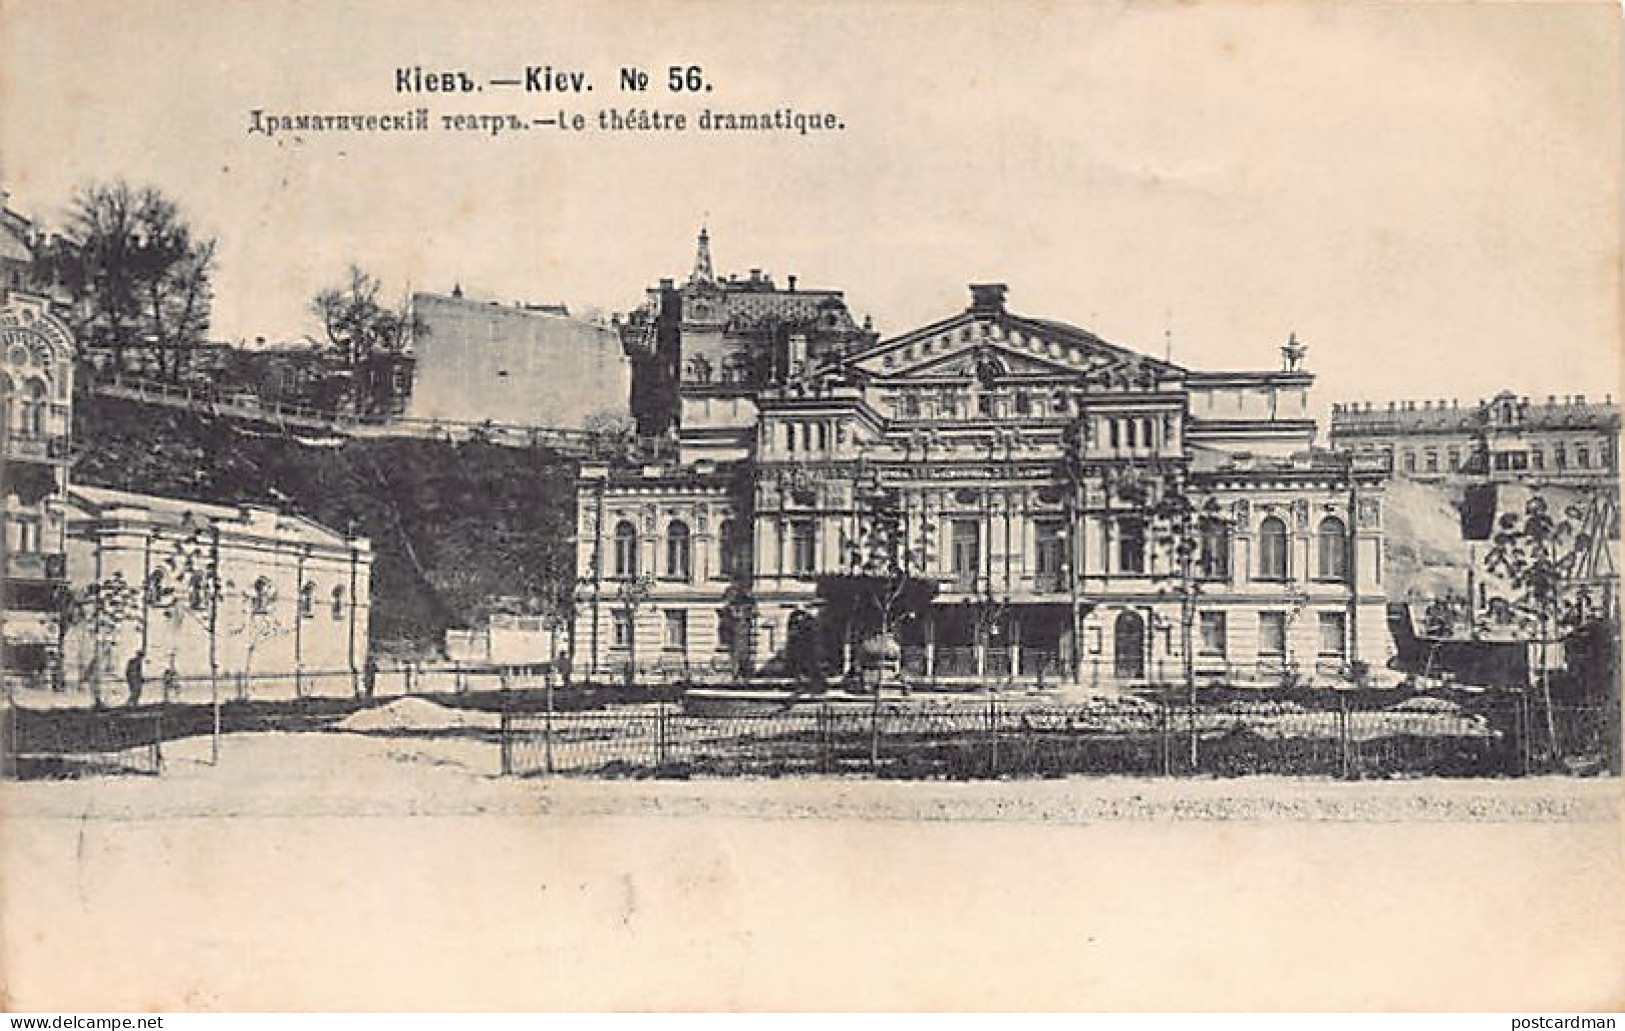 Ukraine - ODESA Odessa - The Dramatic Theater - Publ. Scherer, Nabholz And Co. Year 1904 - 56 - Ucrania